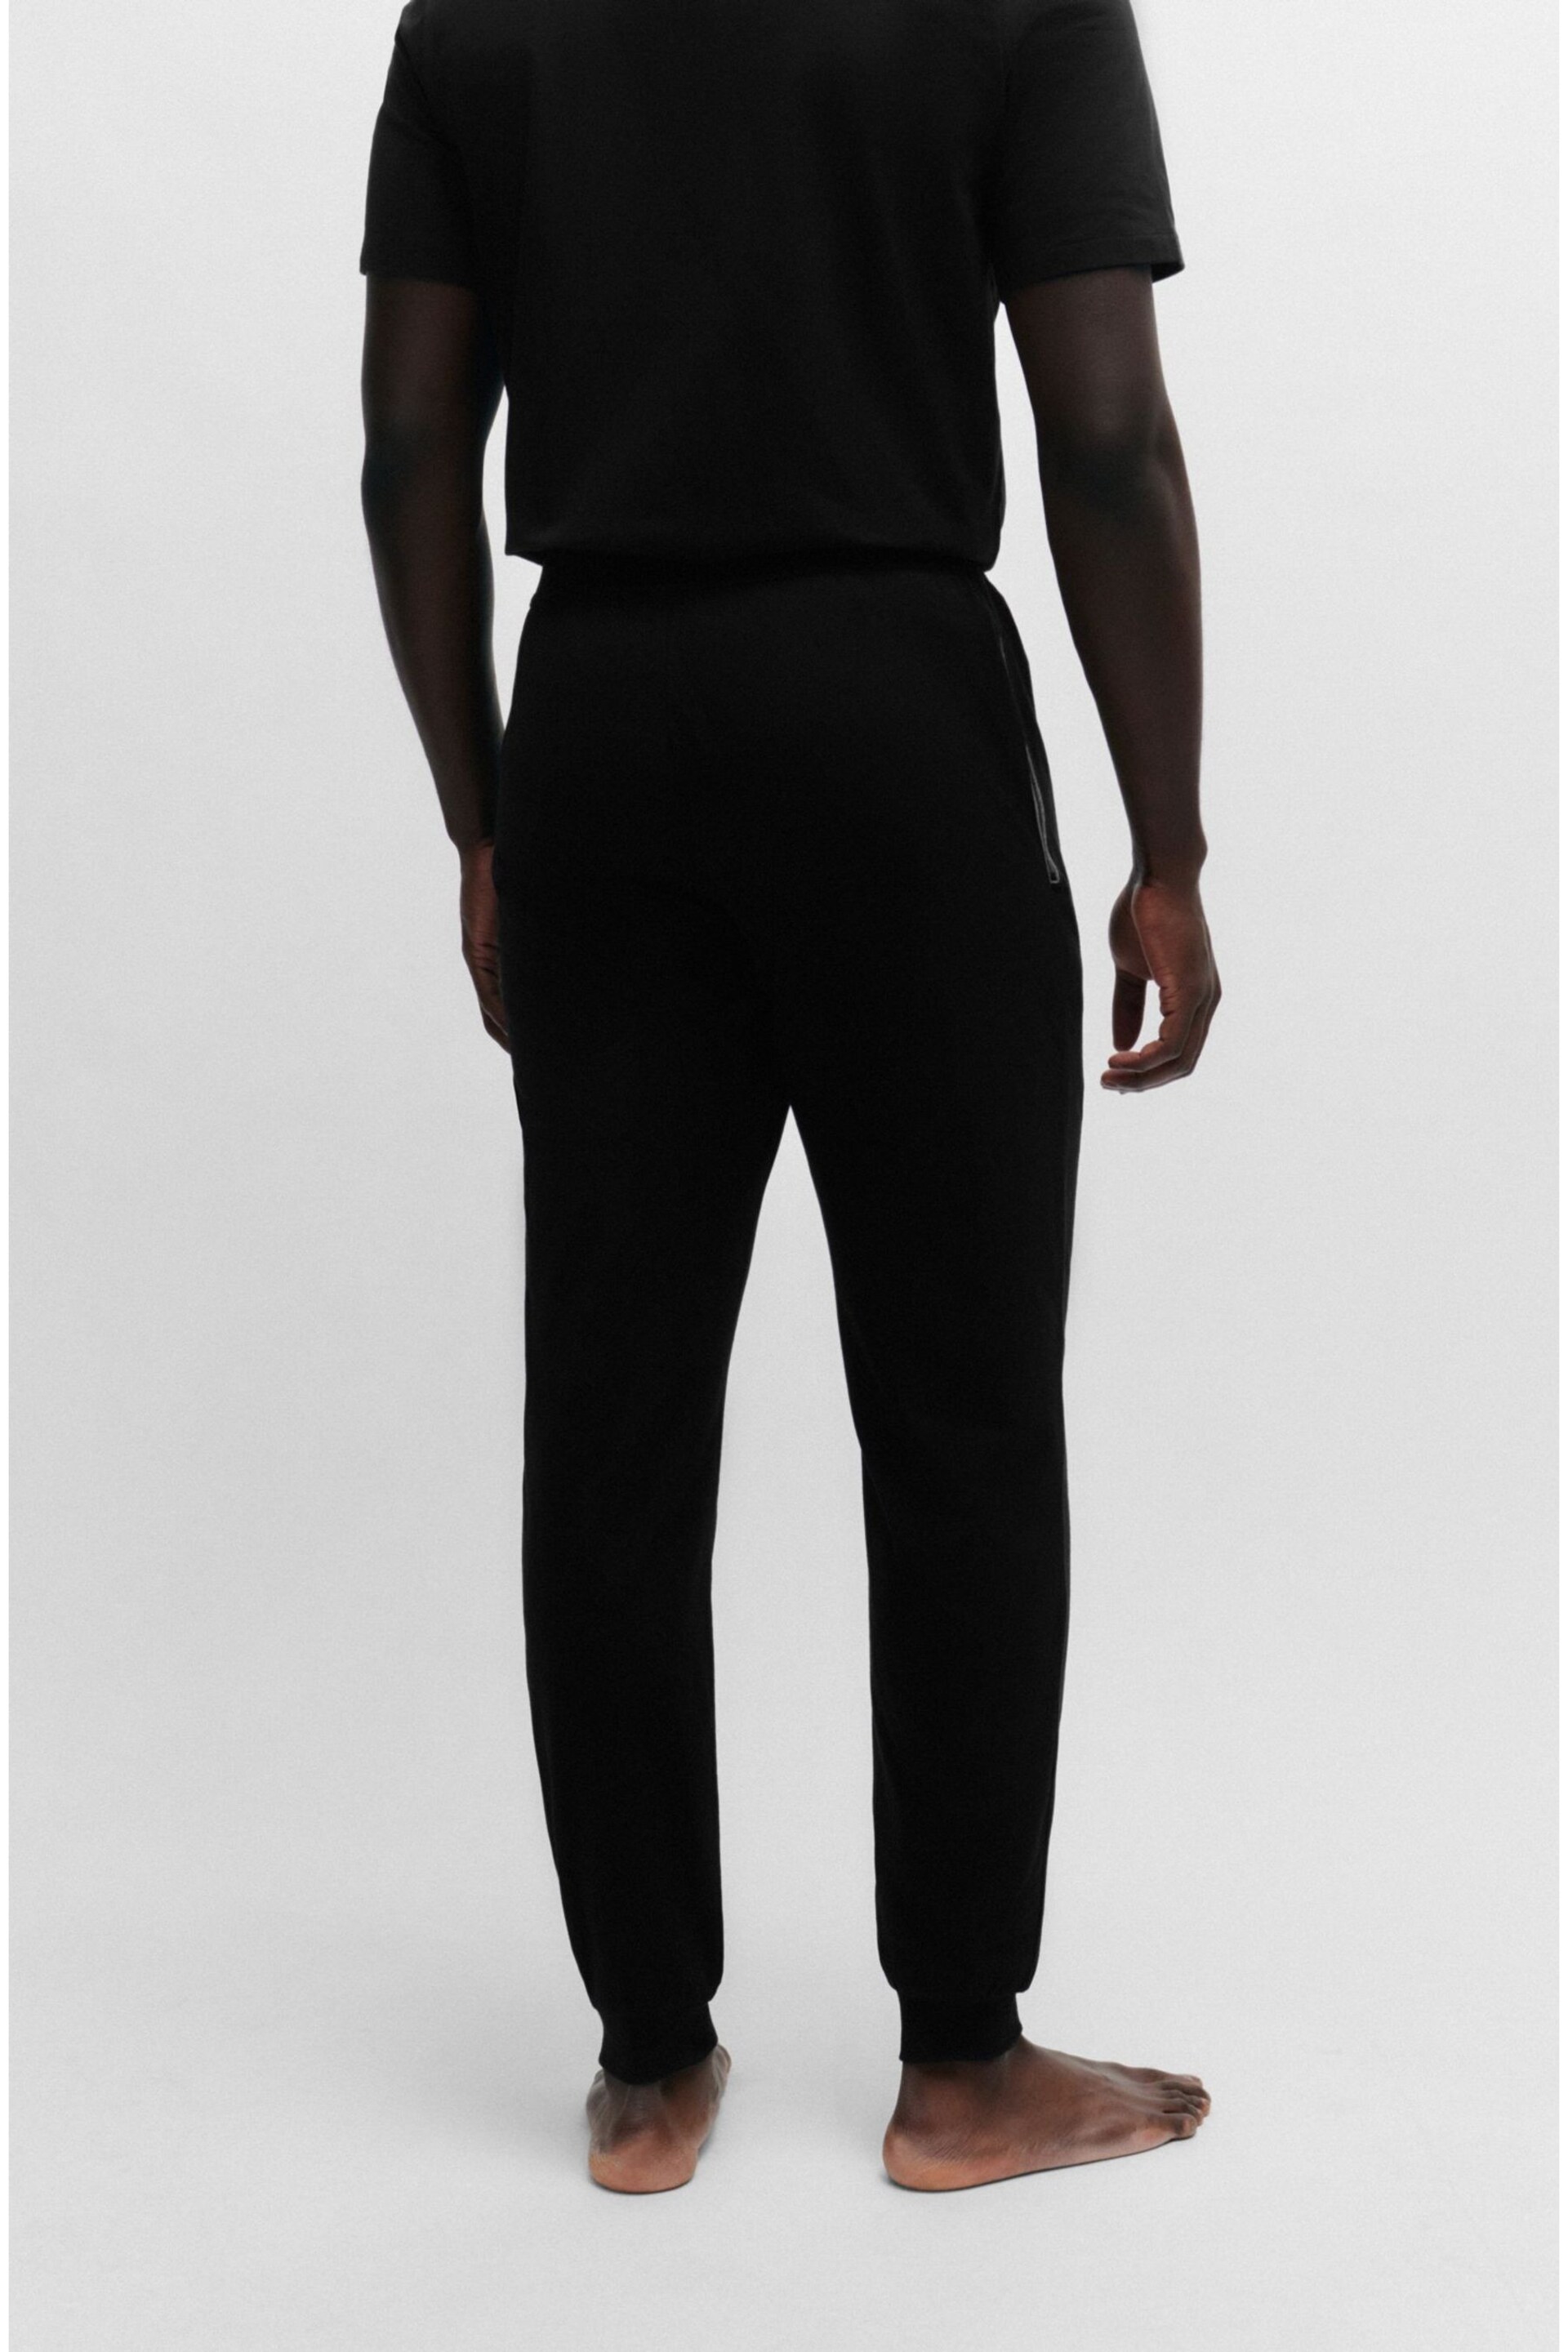 BOSS Black Logo-Detail Joggers In Stretch Cotton - Image 2 of 5